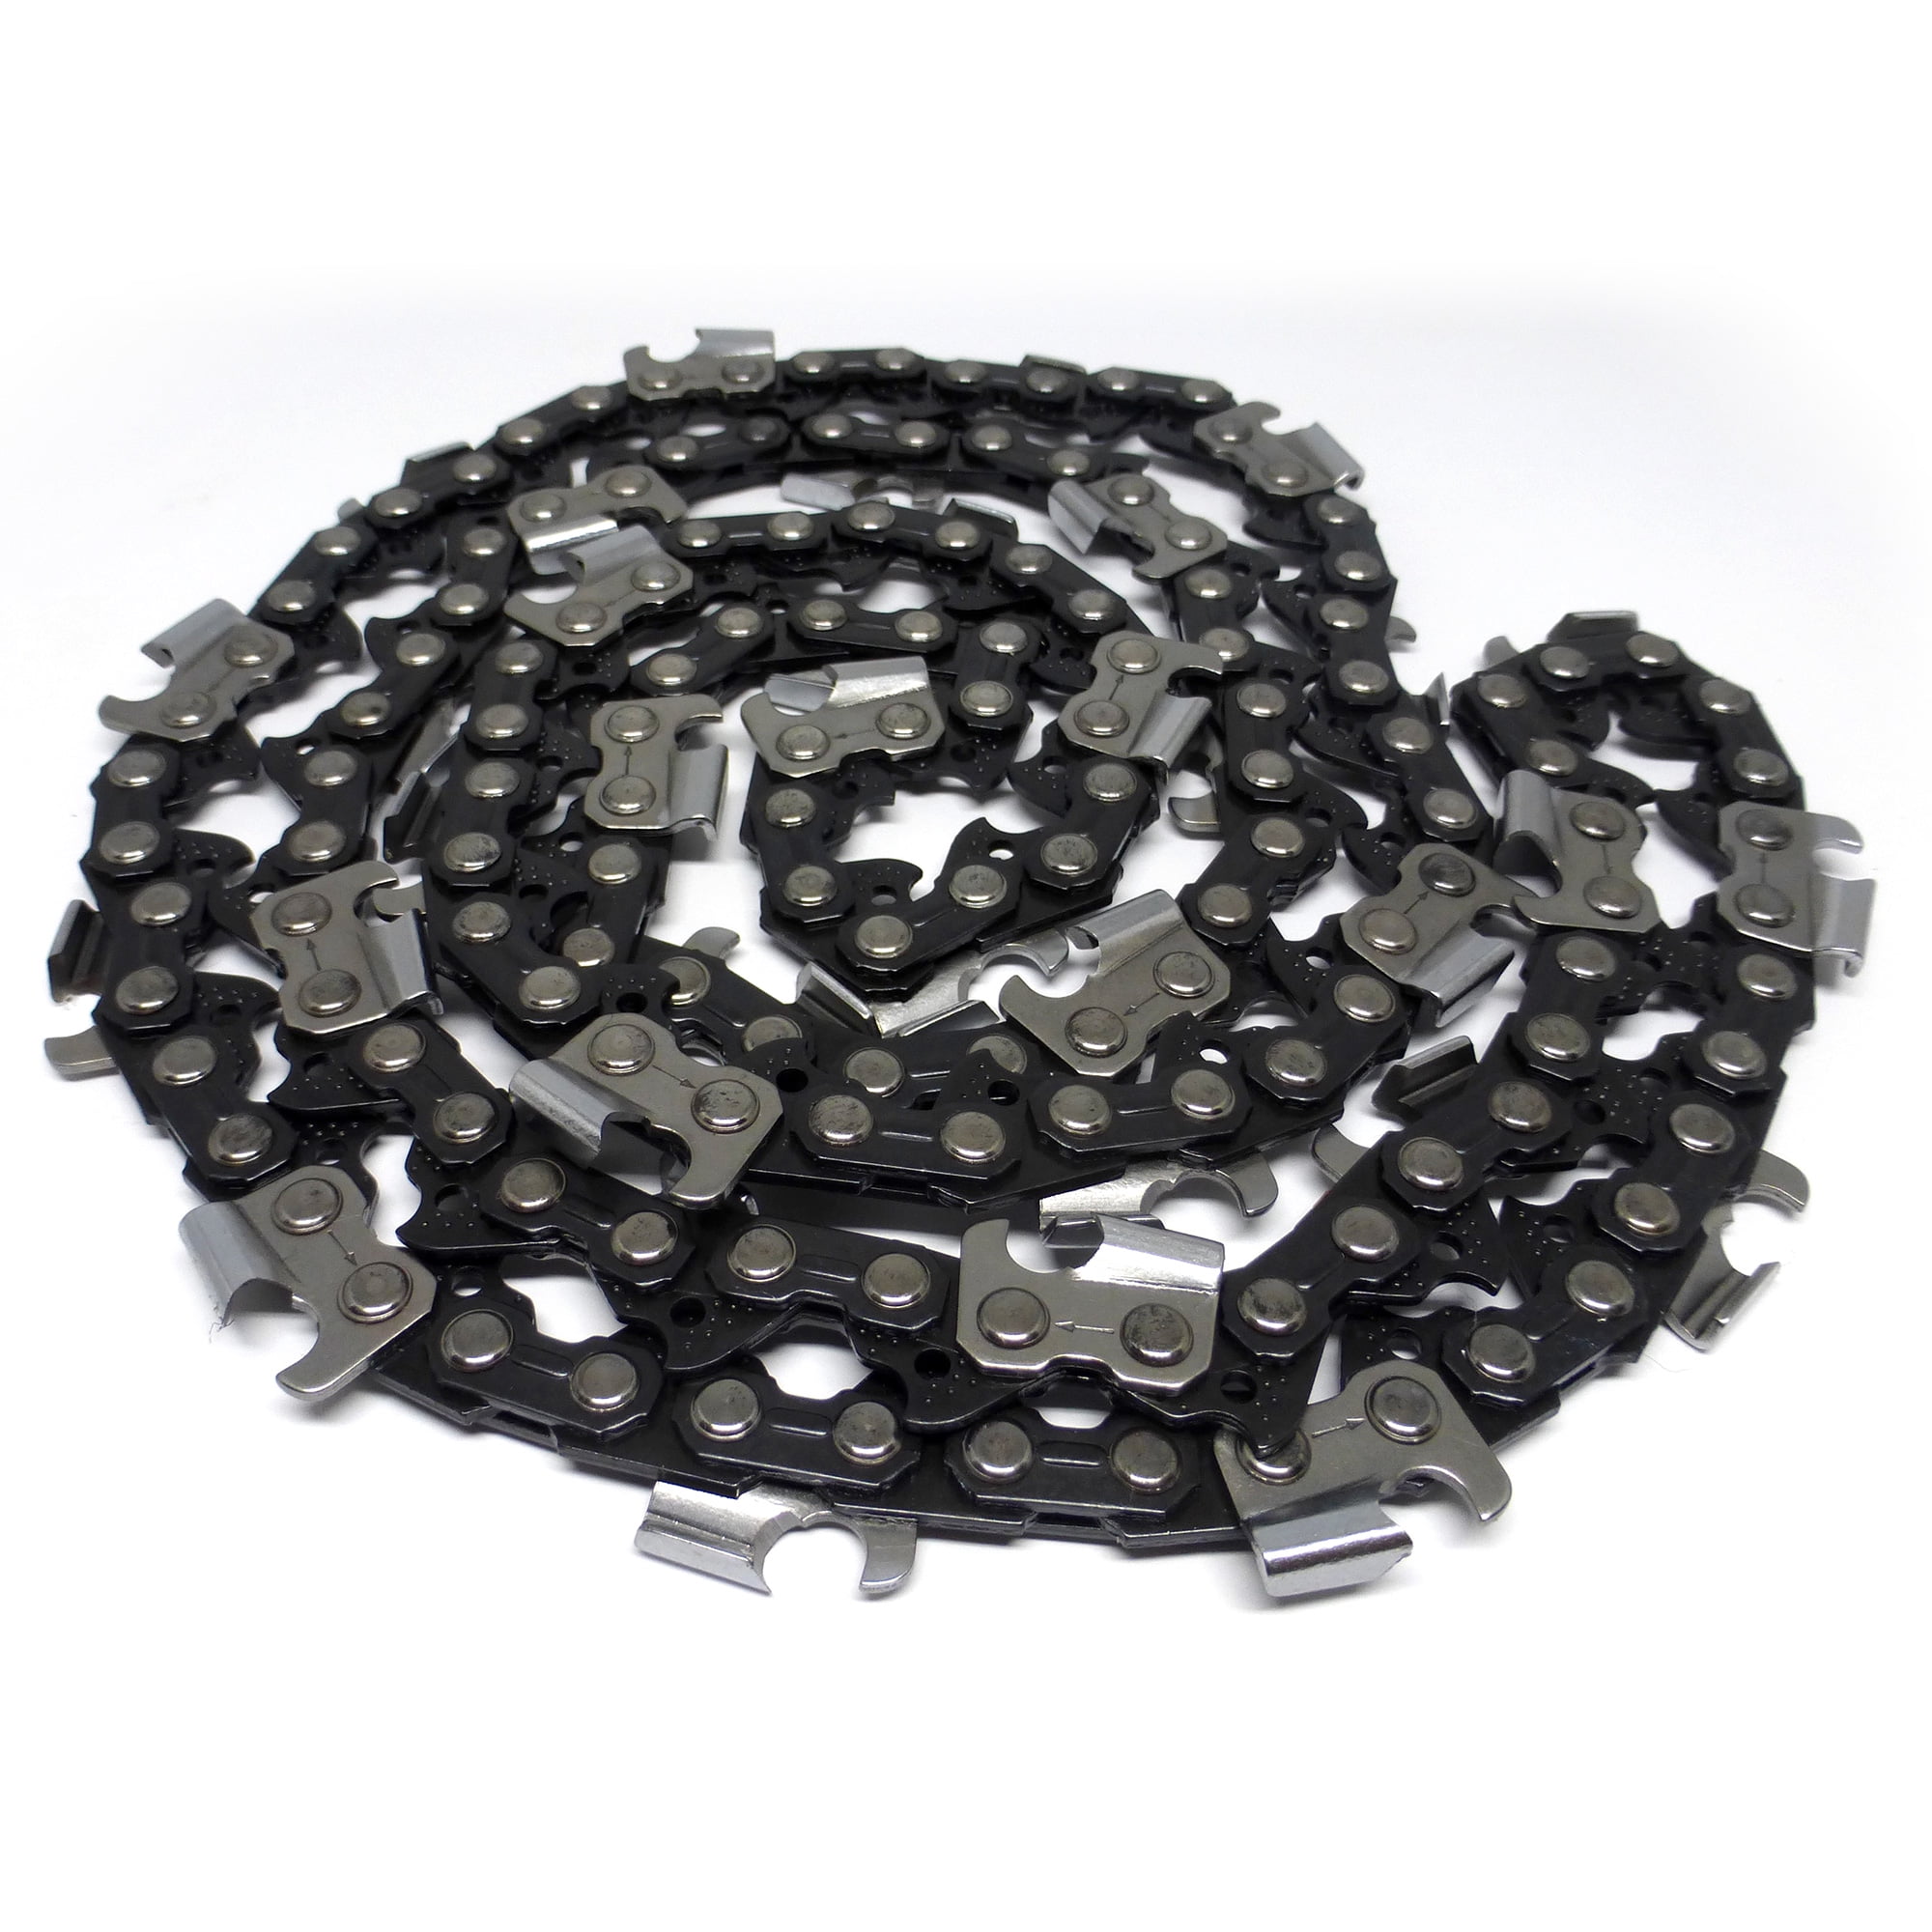 4 Oregon 72LGX072G 20" Full Chisel Chainsaw Chain Replace 33RS 72 DL 3/8 .050